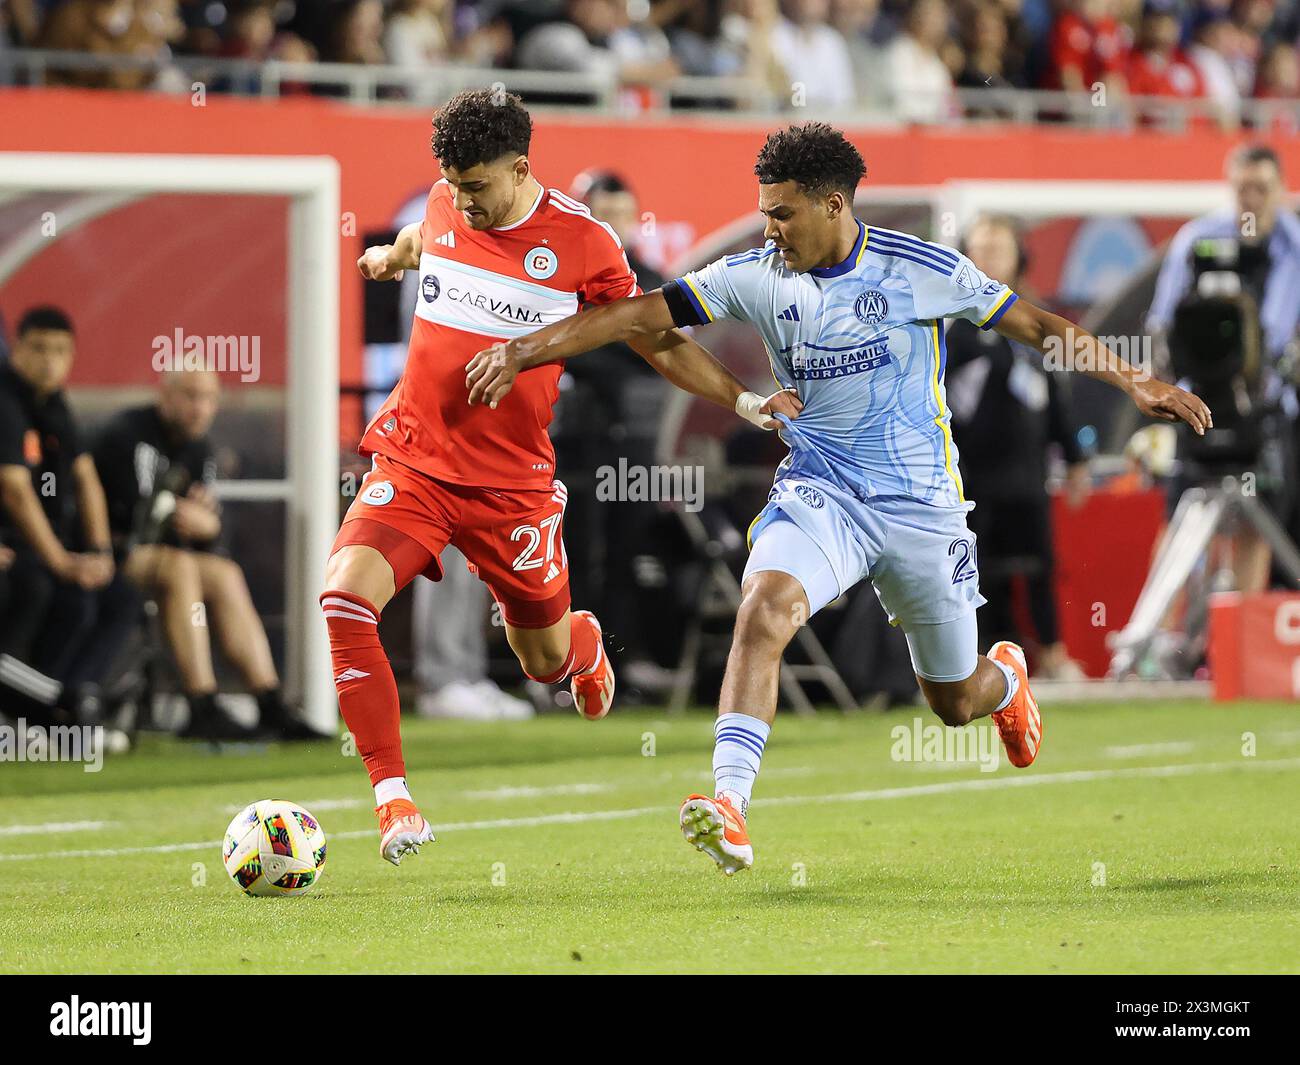 Chicago, USA, 26 April 2024. Major League Soccer (MLS) Chicago Fire FC's Allan Arigoni (27) fights for the ball against Atlanta United FC's Caleb Wiley (26) at Soldier Field in Chicago, IL, USA. Credit: Tony Gadomski / All Sport Imaging / Alamy Live News Stock Photo